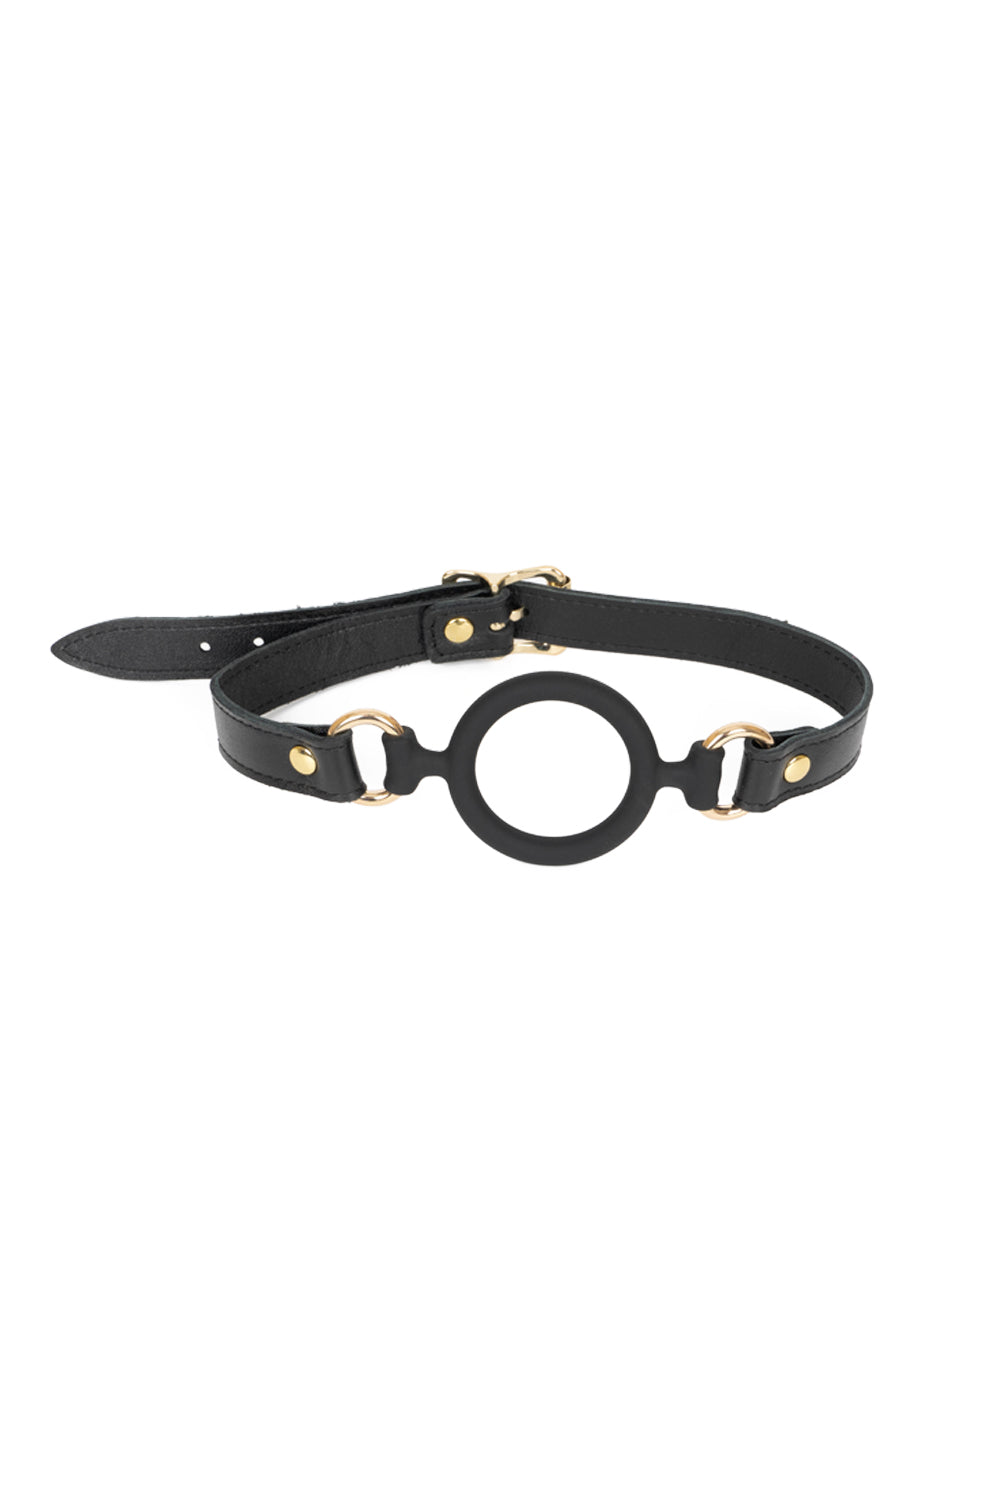 Soft Silicone Mouth Ring Gag. Black